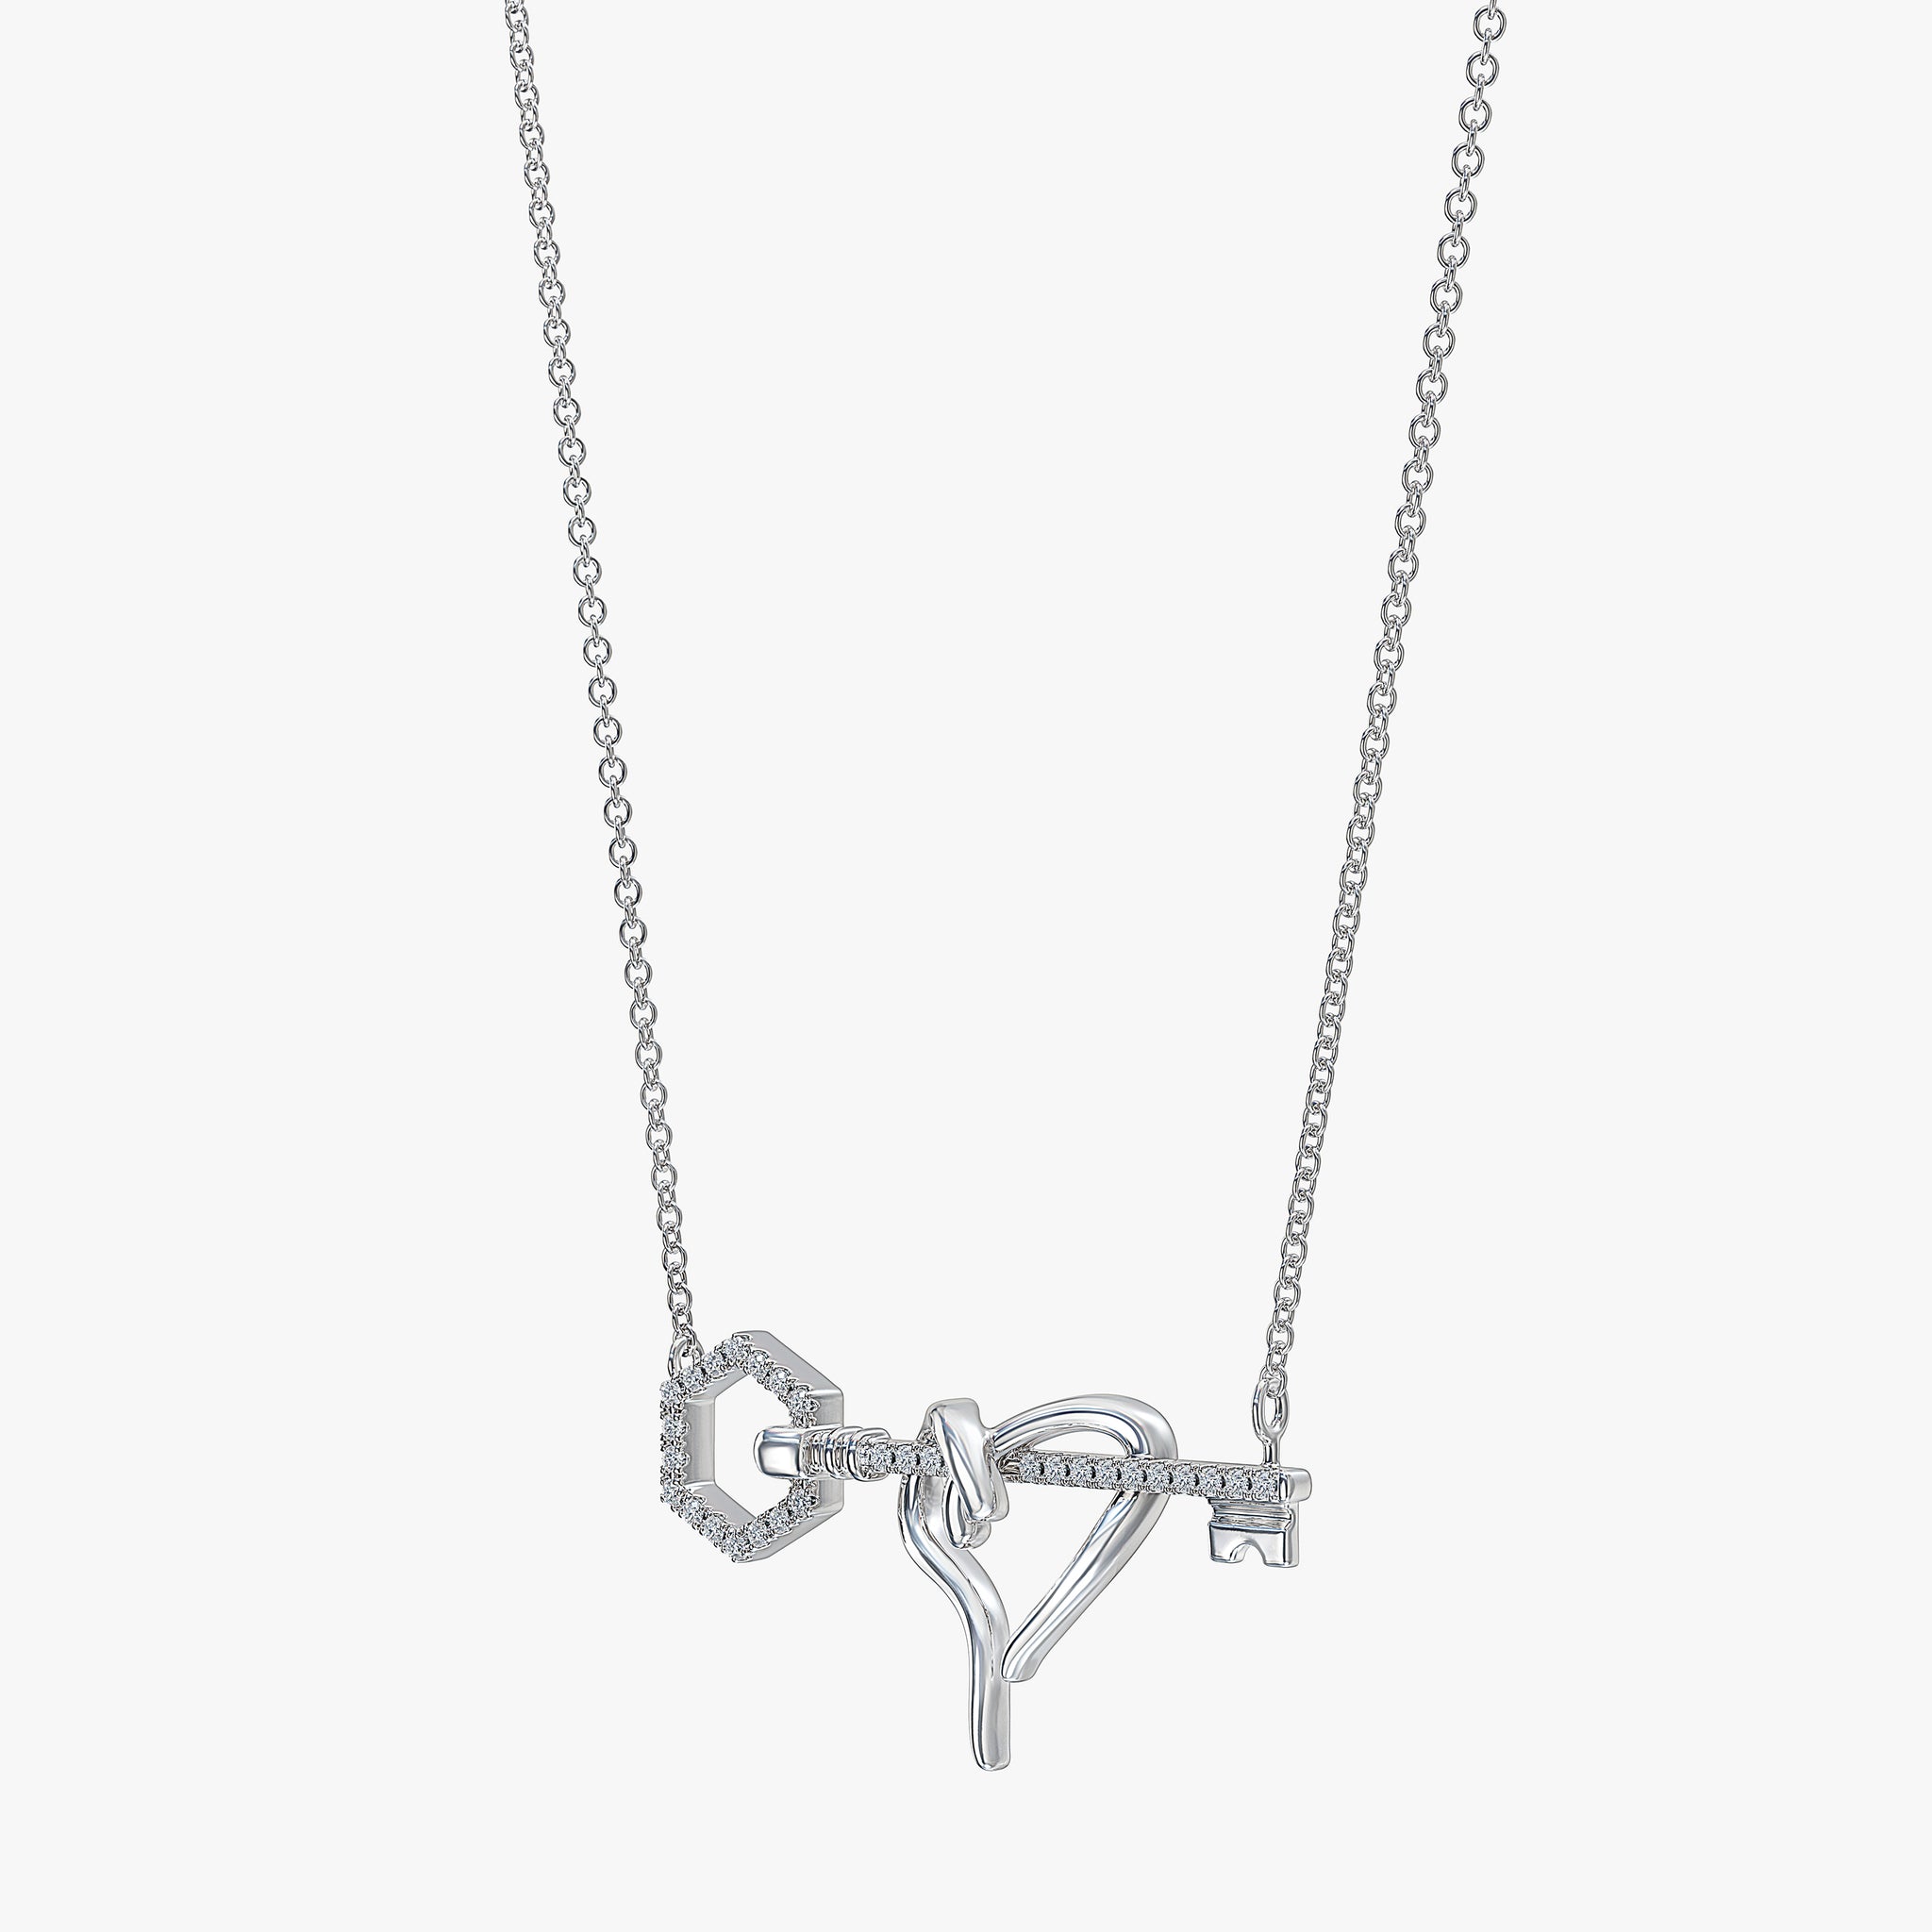 J'EVAR Sterling Silver Heart & Hexagon Key ALTR Lab Grown Diamond Necklace Perspective View